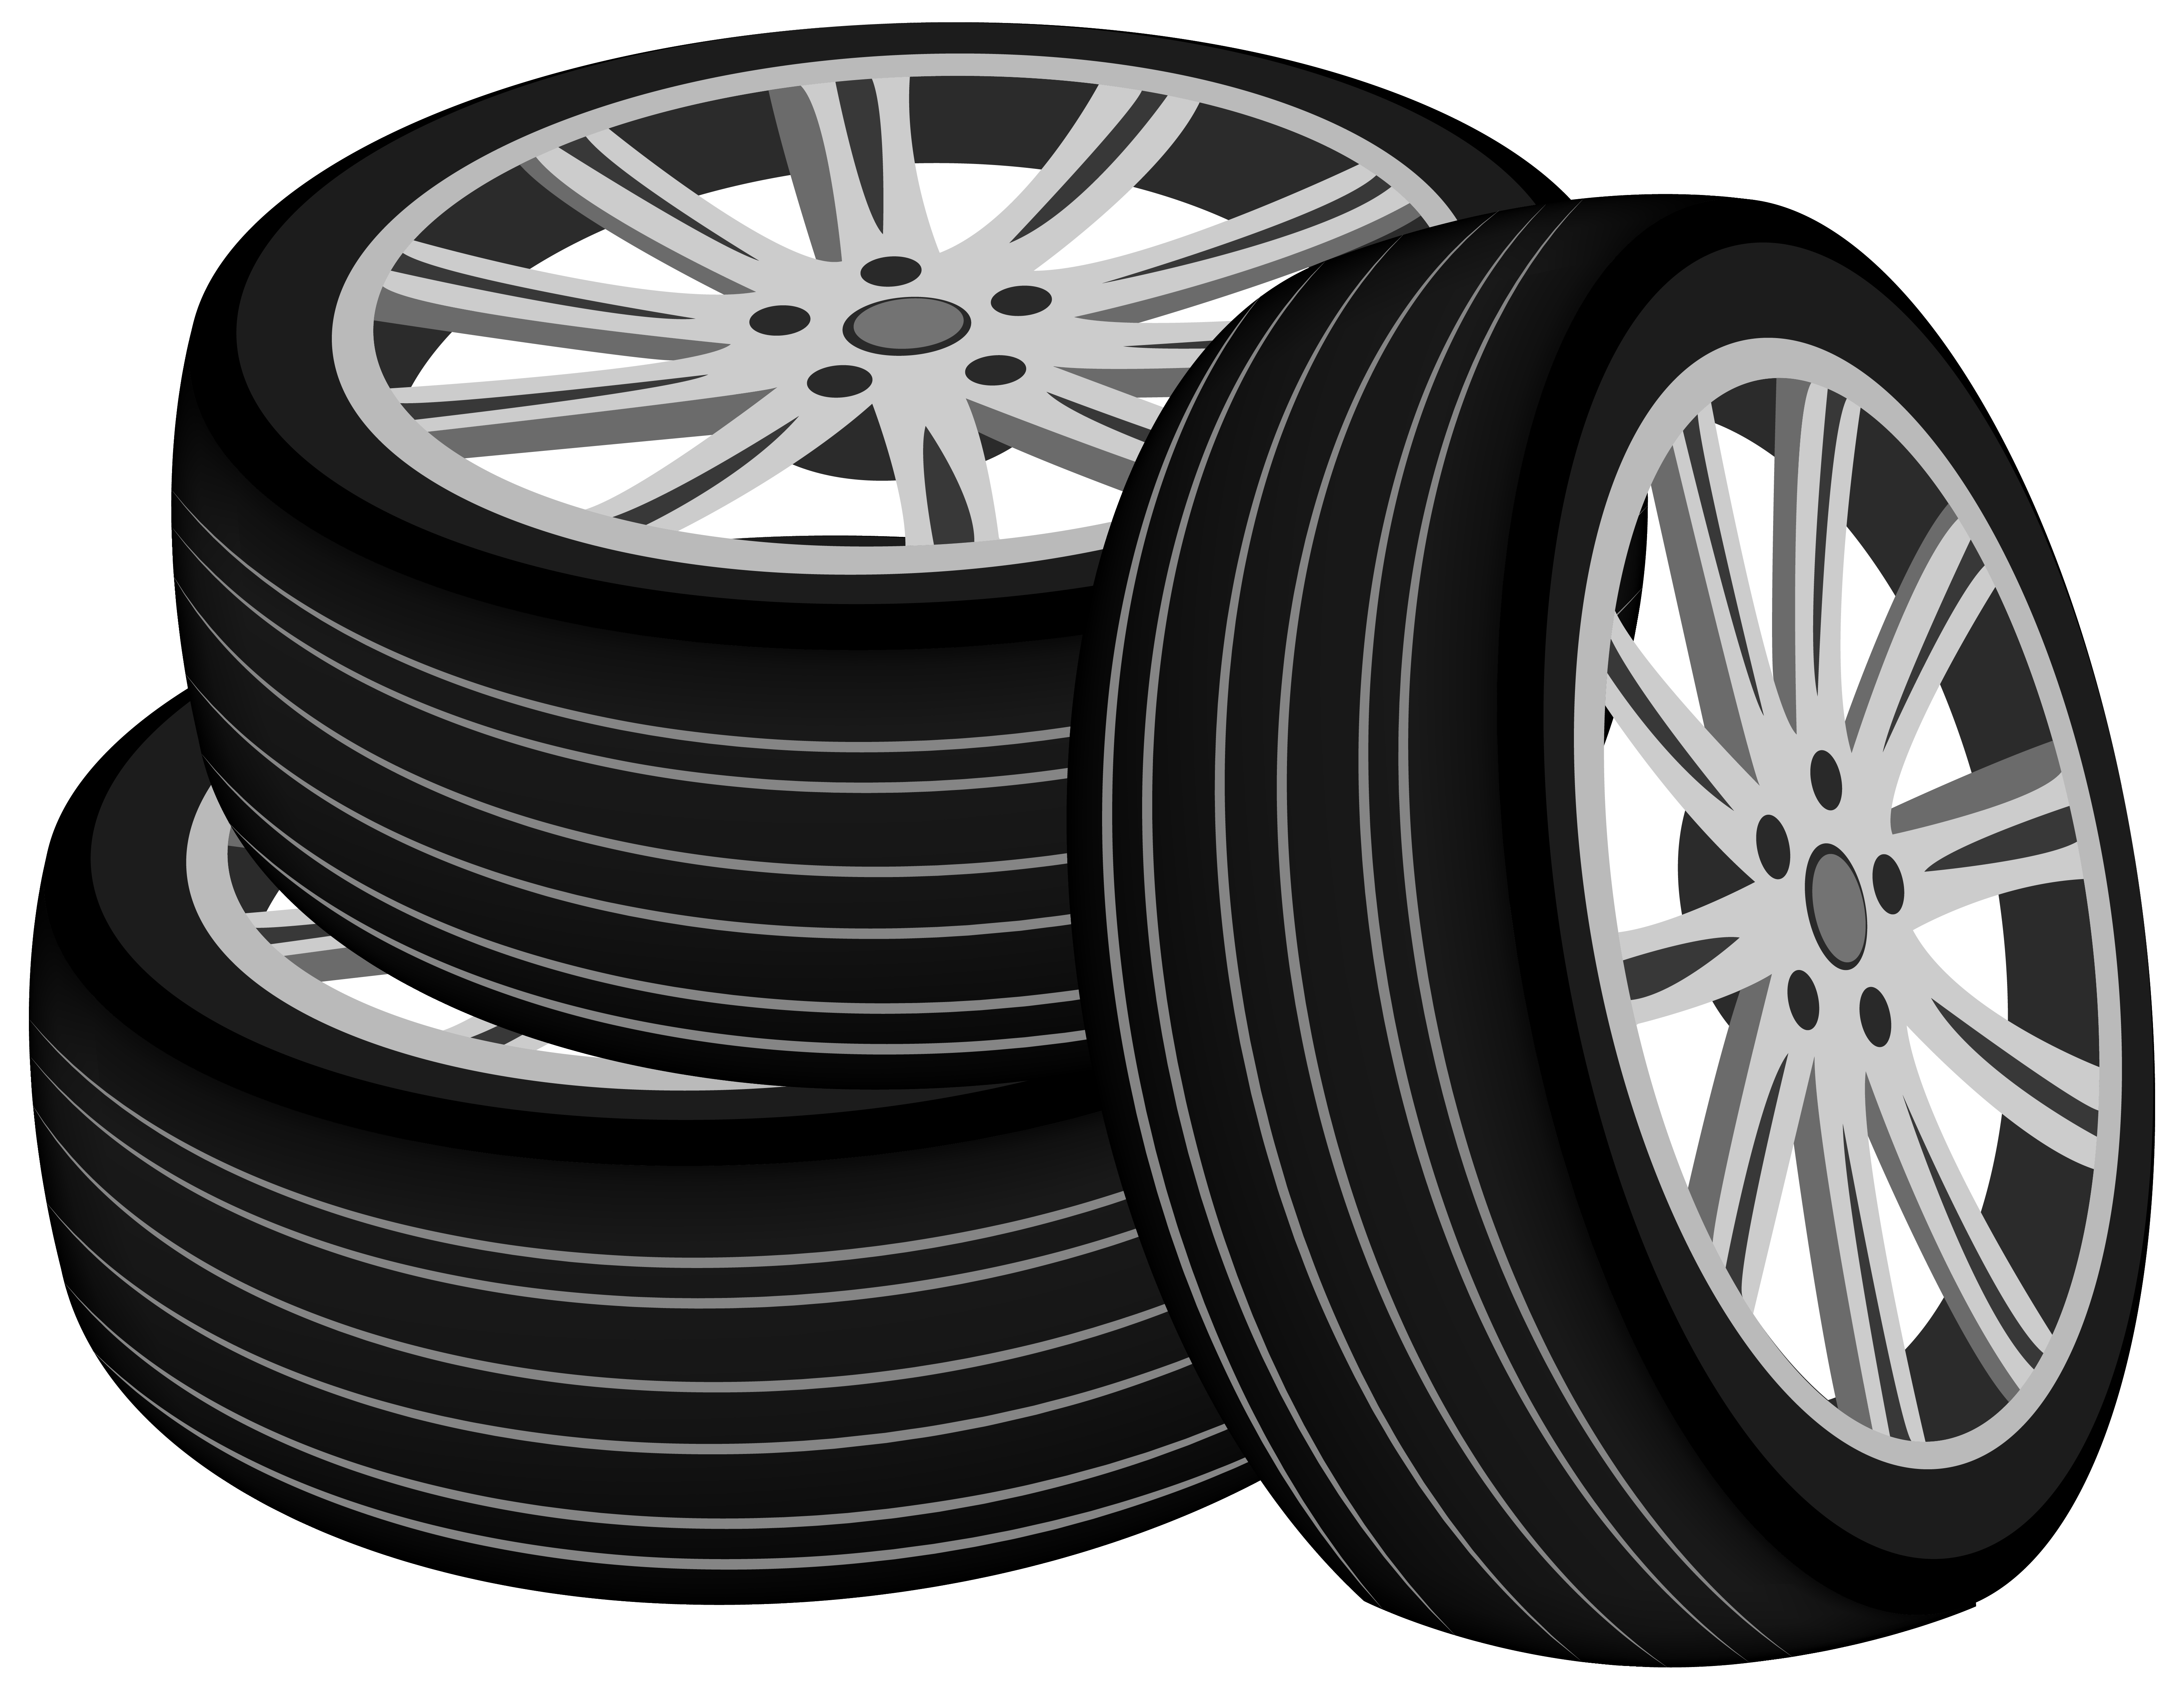 68 tires clipart.